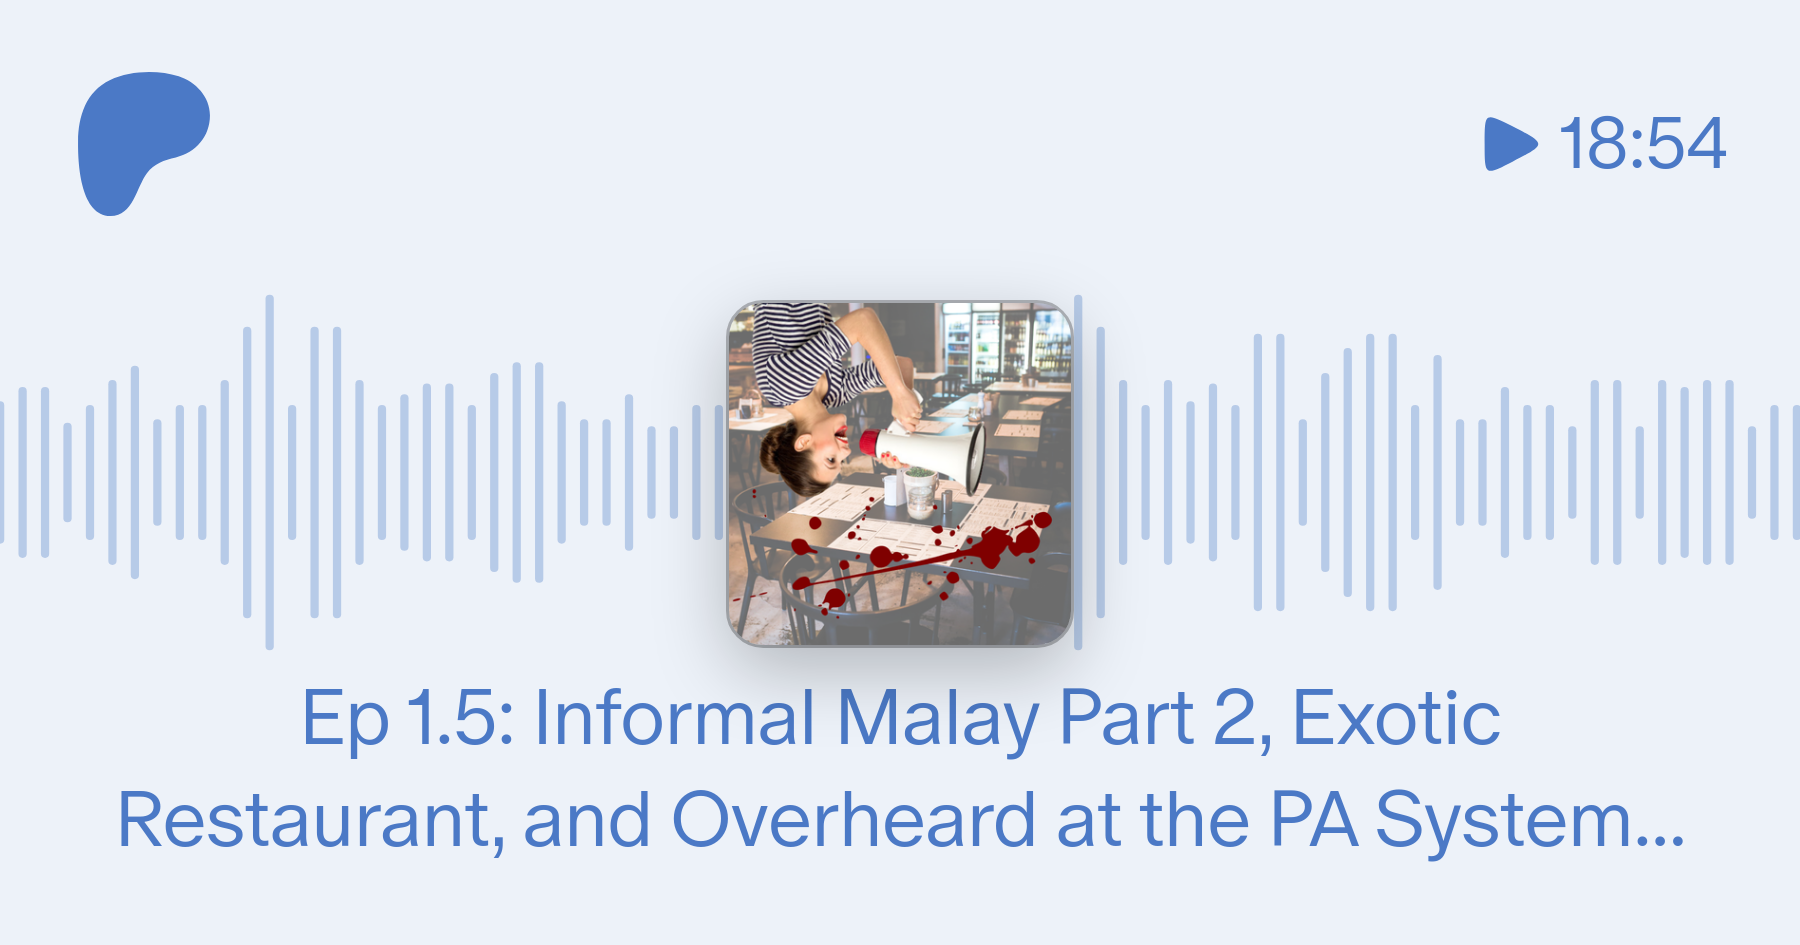 Ep 1 5 Informal Malay Part 2 Exotic Restaurant And Overheard At The Pa System Pinball Monkeys On Patreon